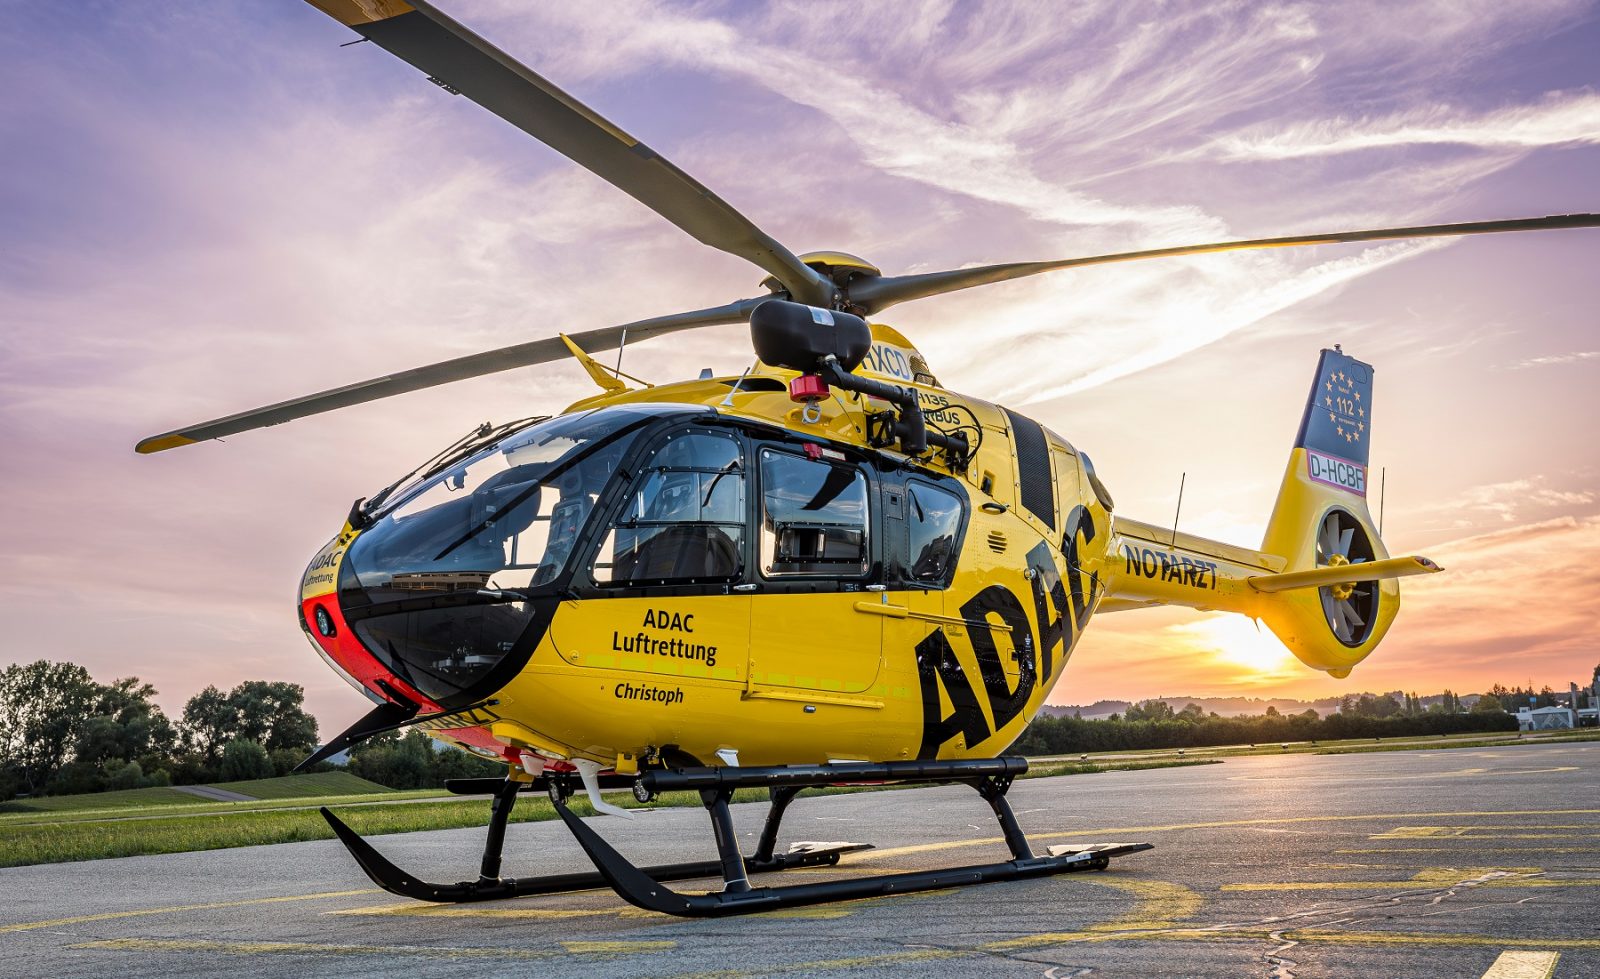 ADAC takes delivery of 1,500th H135